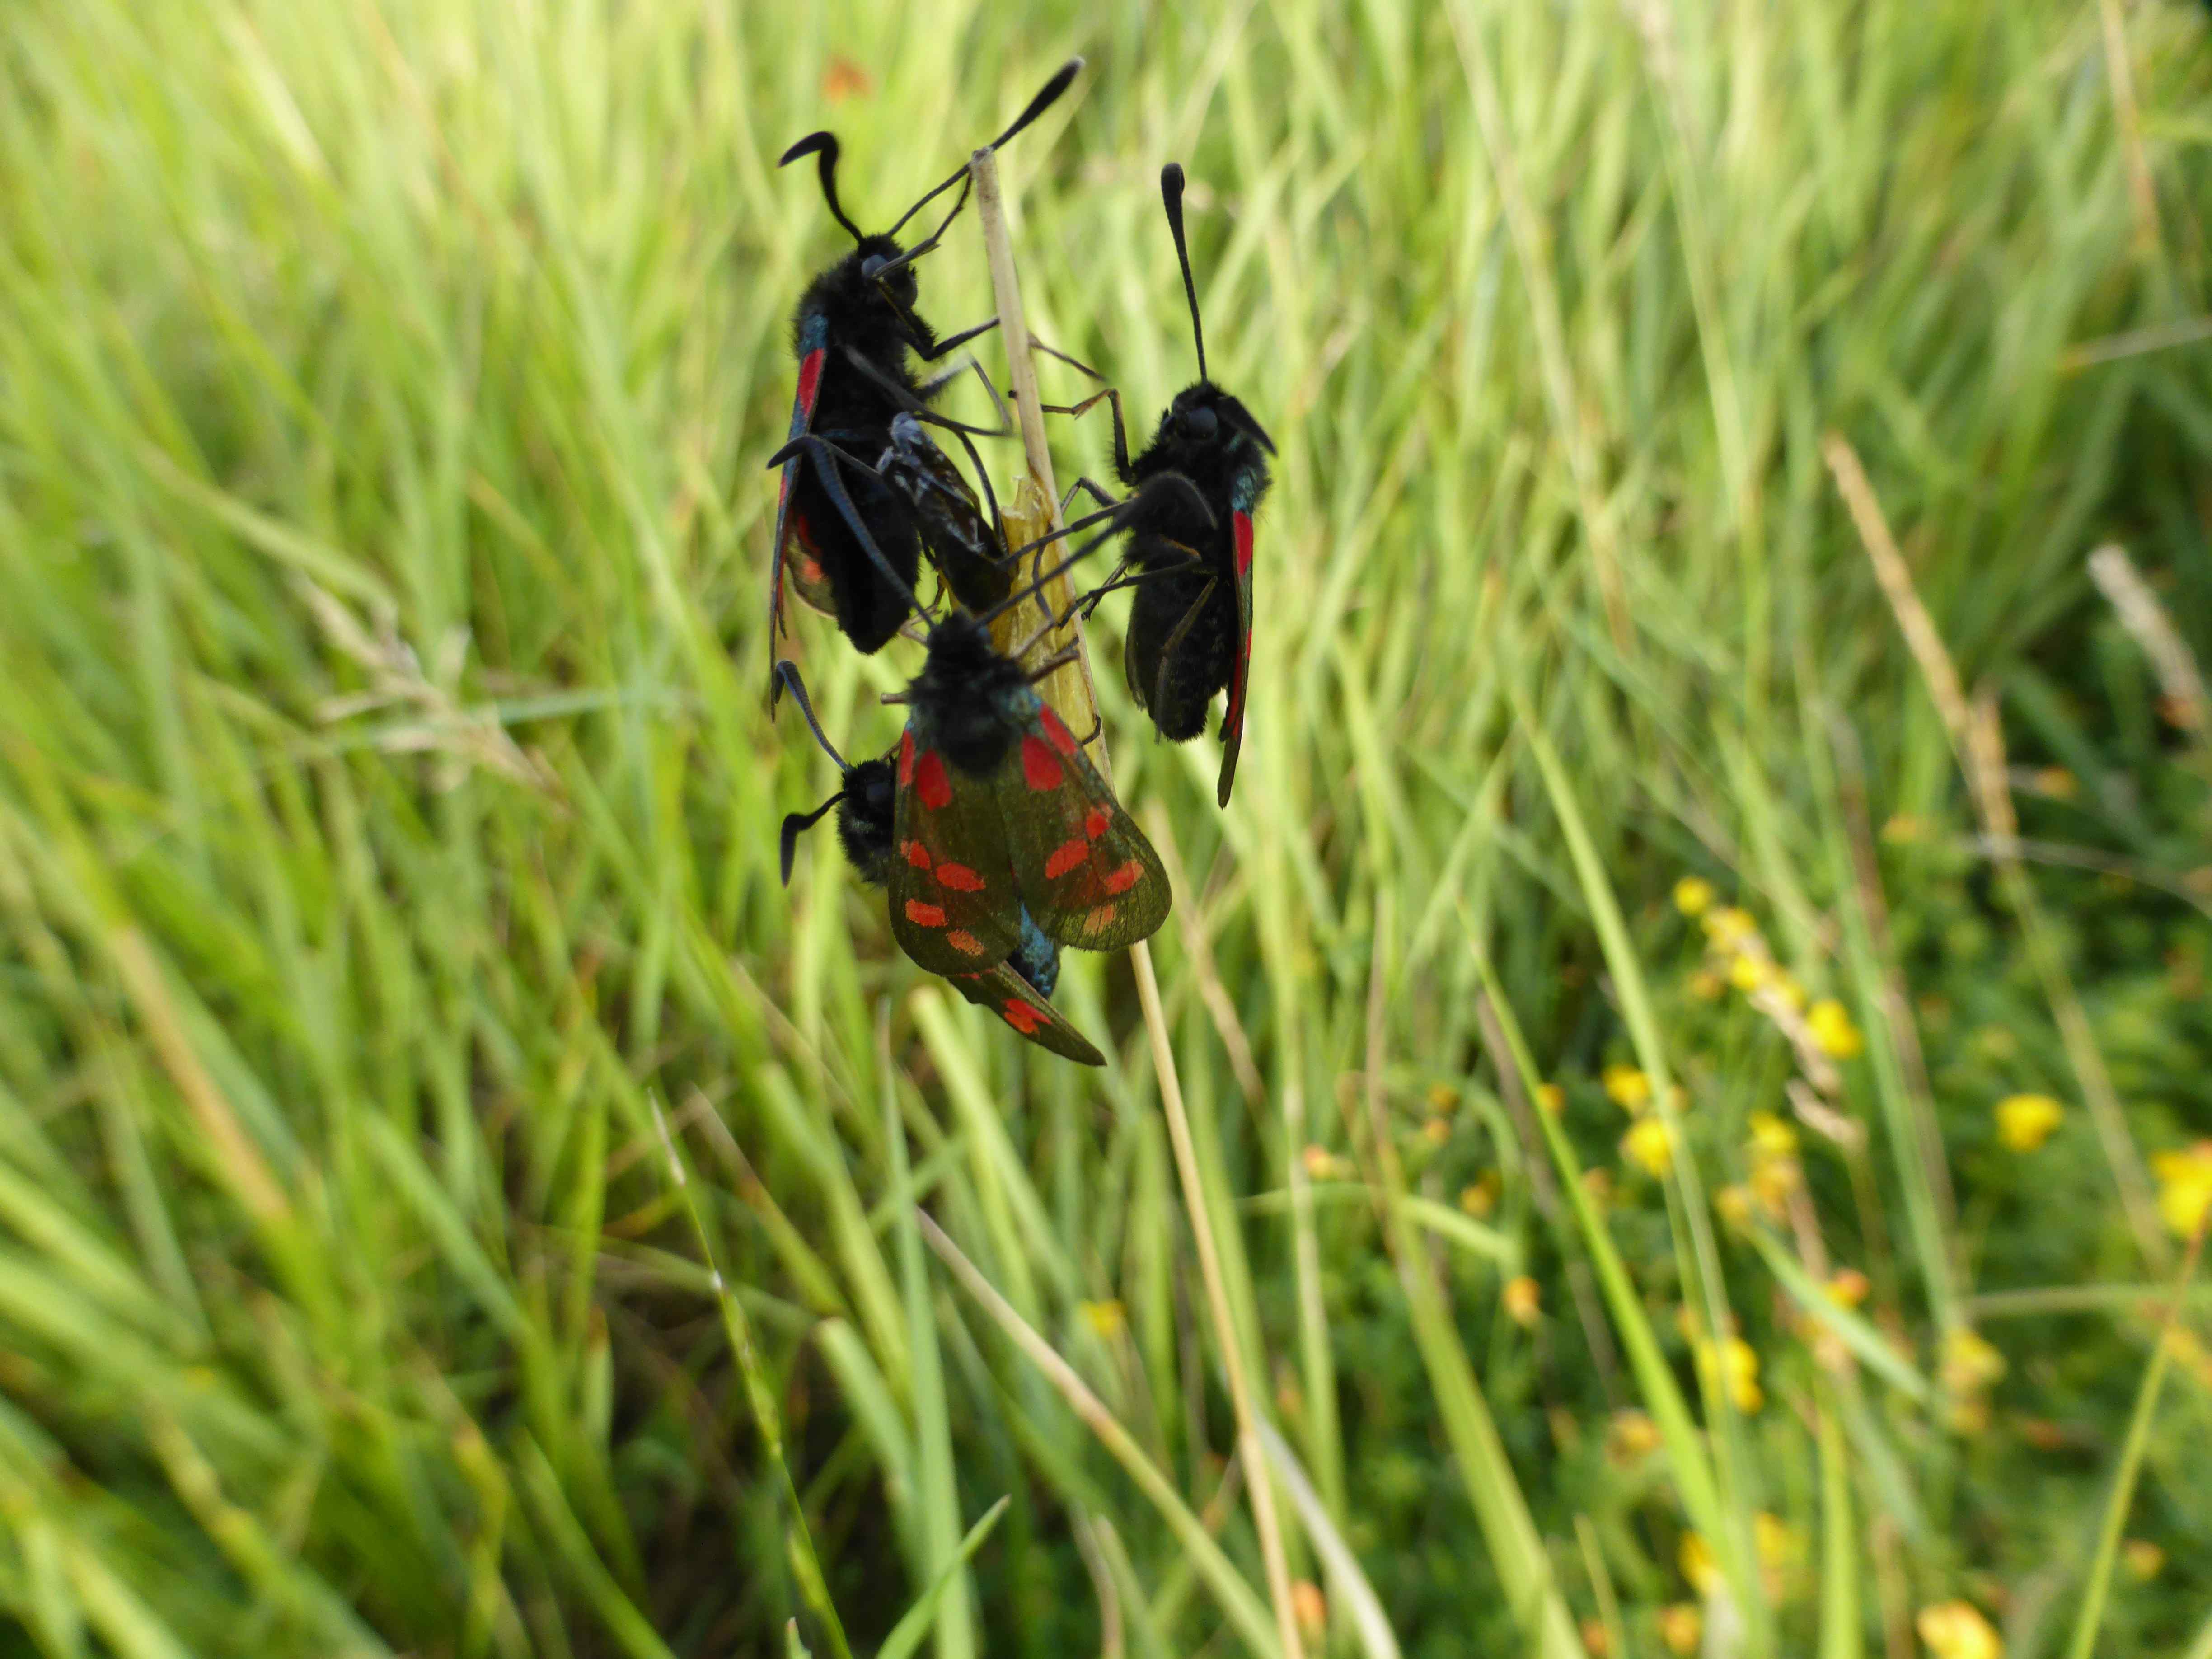 The day-flying Six-spot Burnet moth has dramatically colonised the meadow, using bird's-foot trefoil as its larval foodplant.